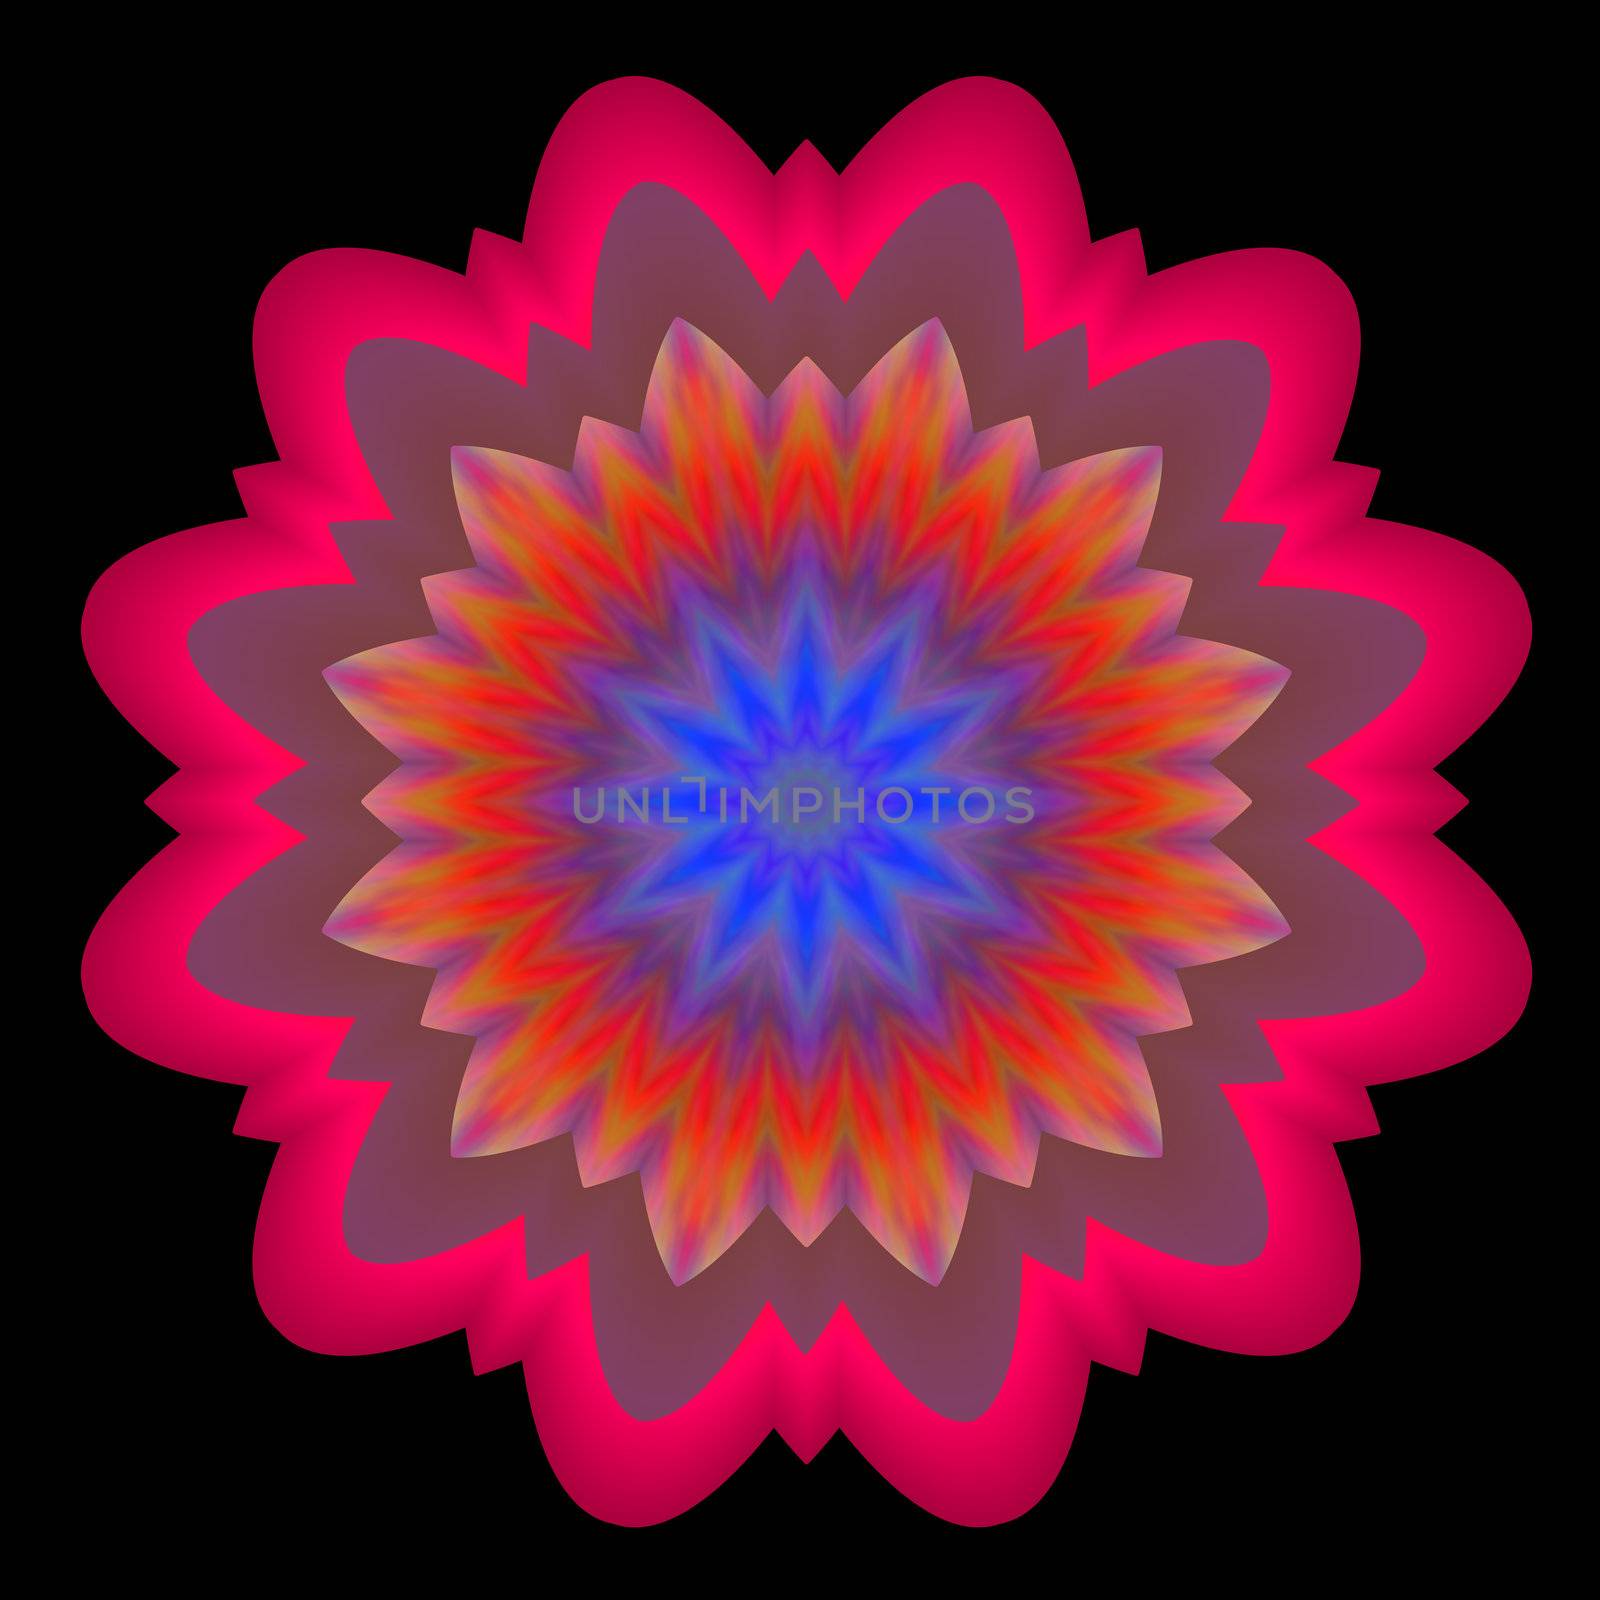 A mandala shaped abstract illustration with a starburst central motif. It is done in orange and blue and floats on a black background. 